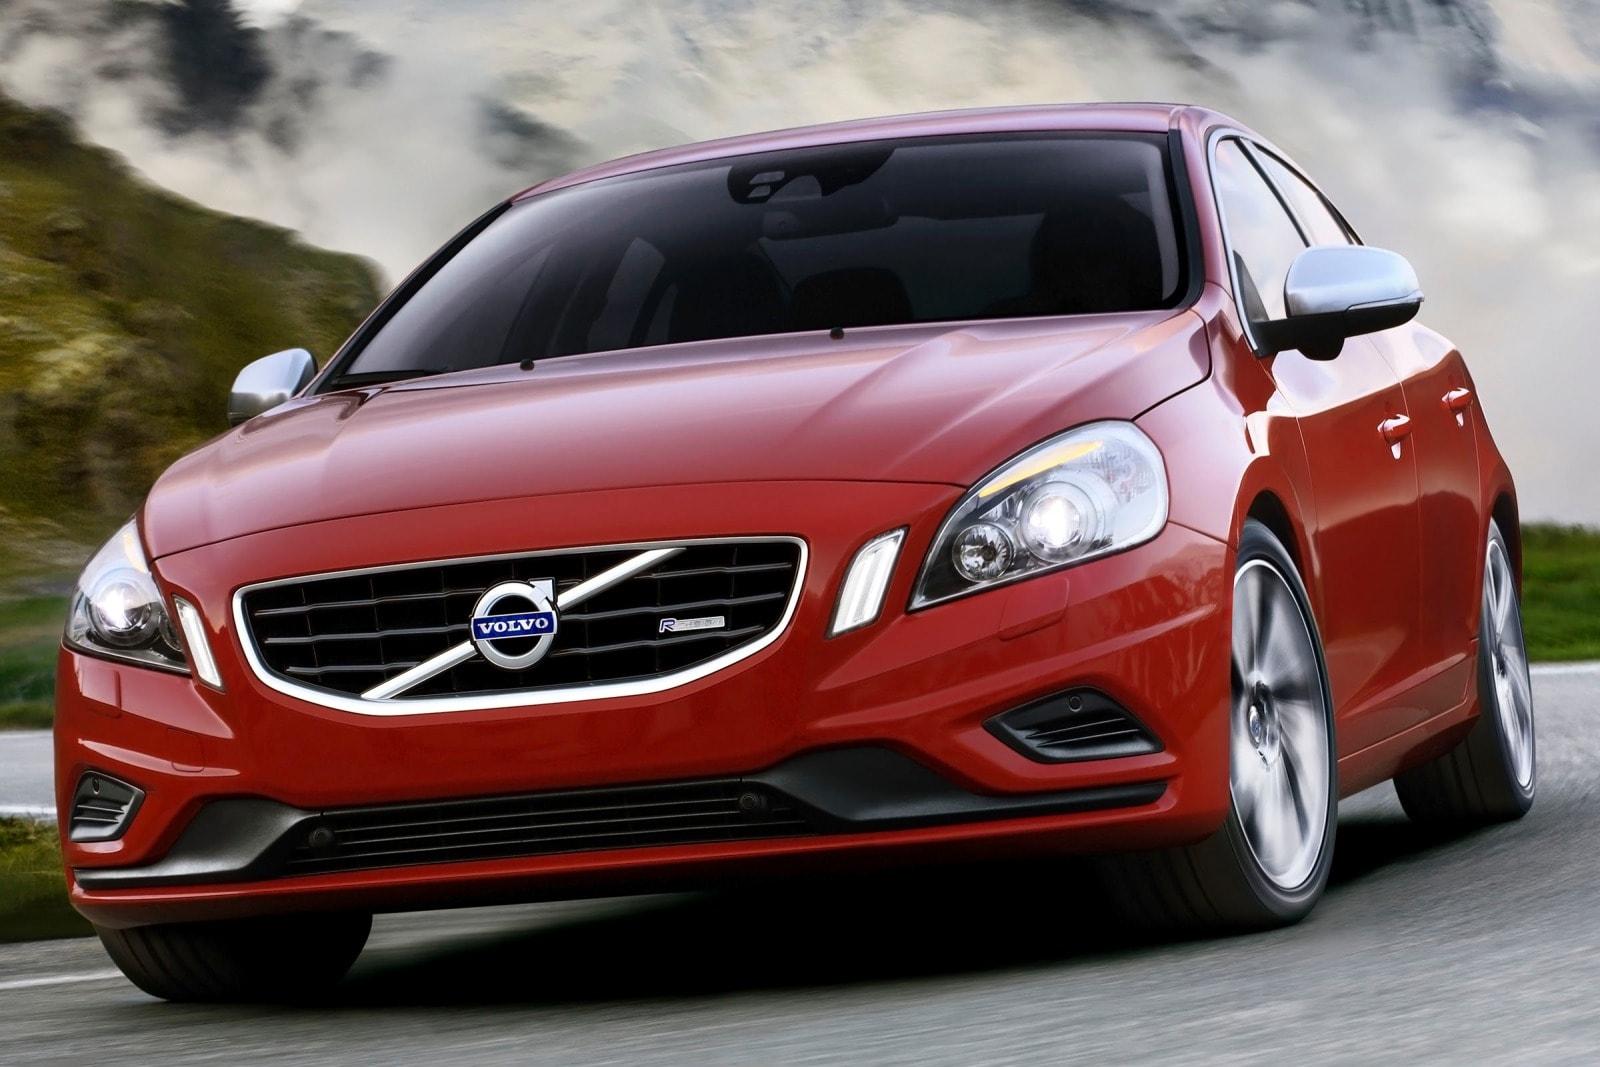 2013 Volvo S60 Review & Ratings | Edmunds